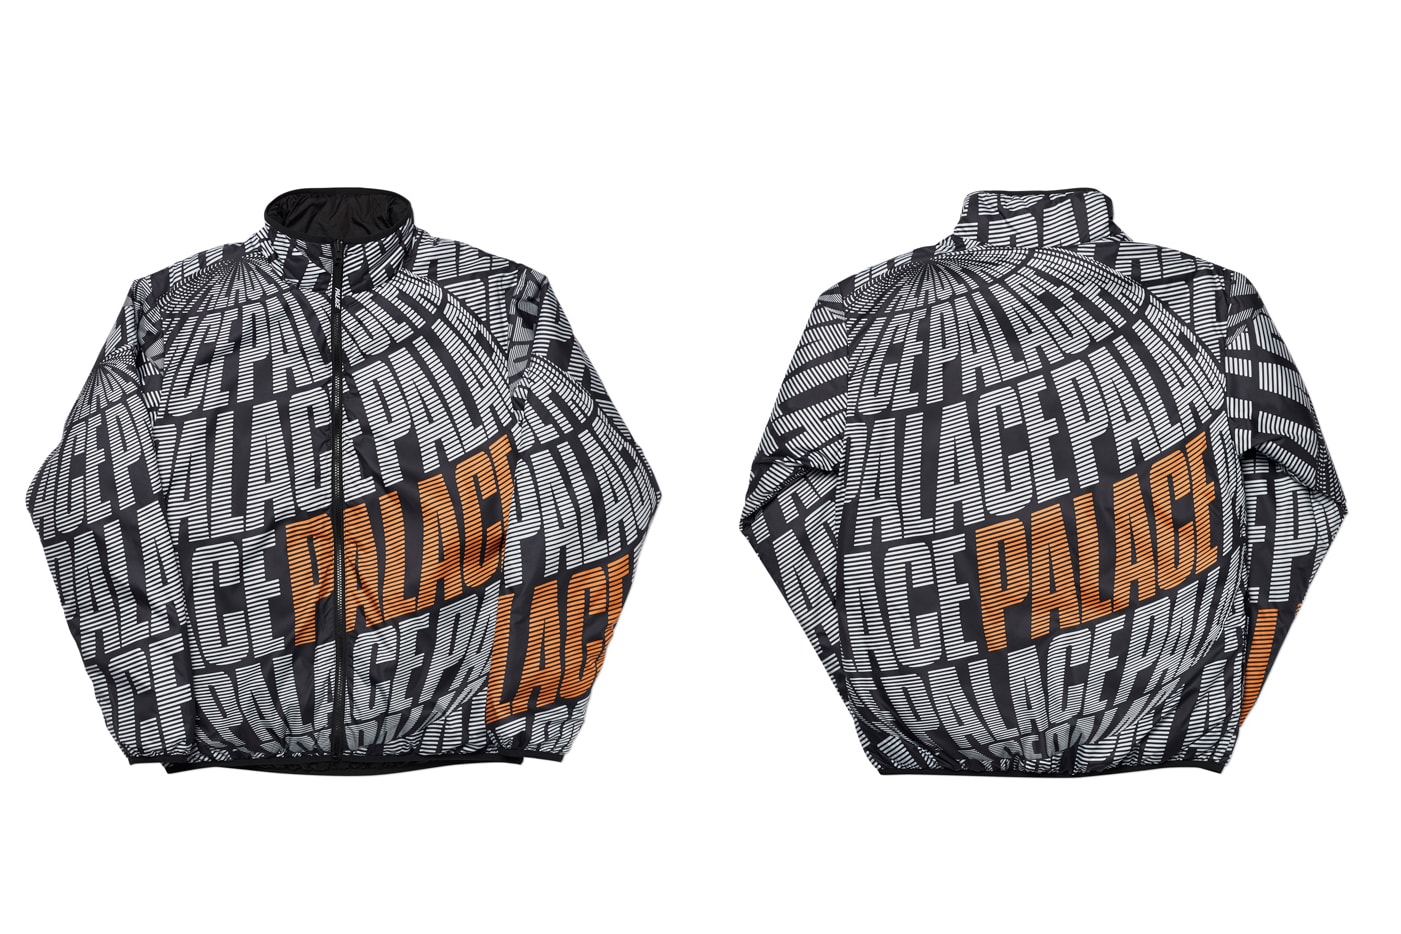 palace spring summer collection release drop 3 date t-shirts hoodies jackets 